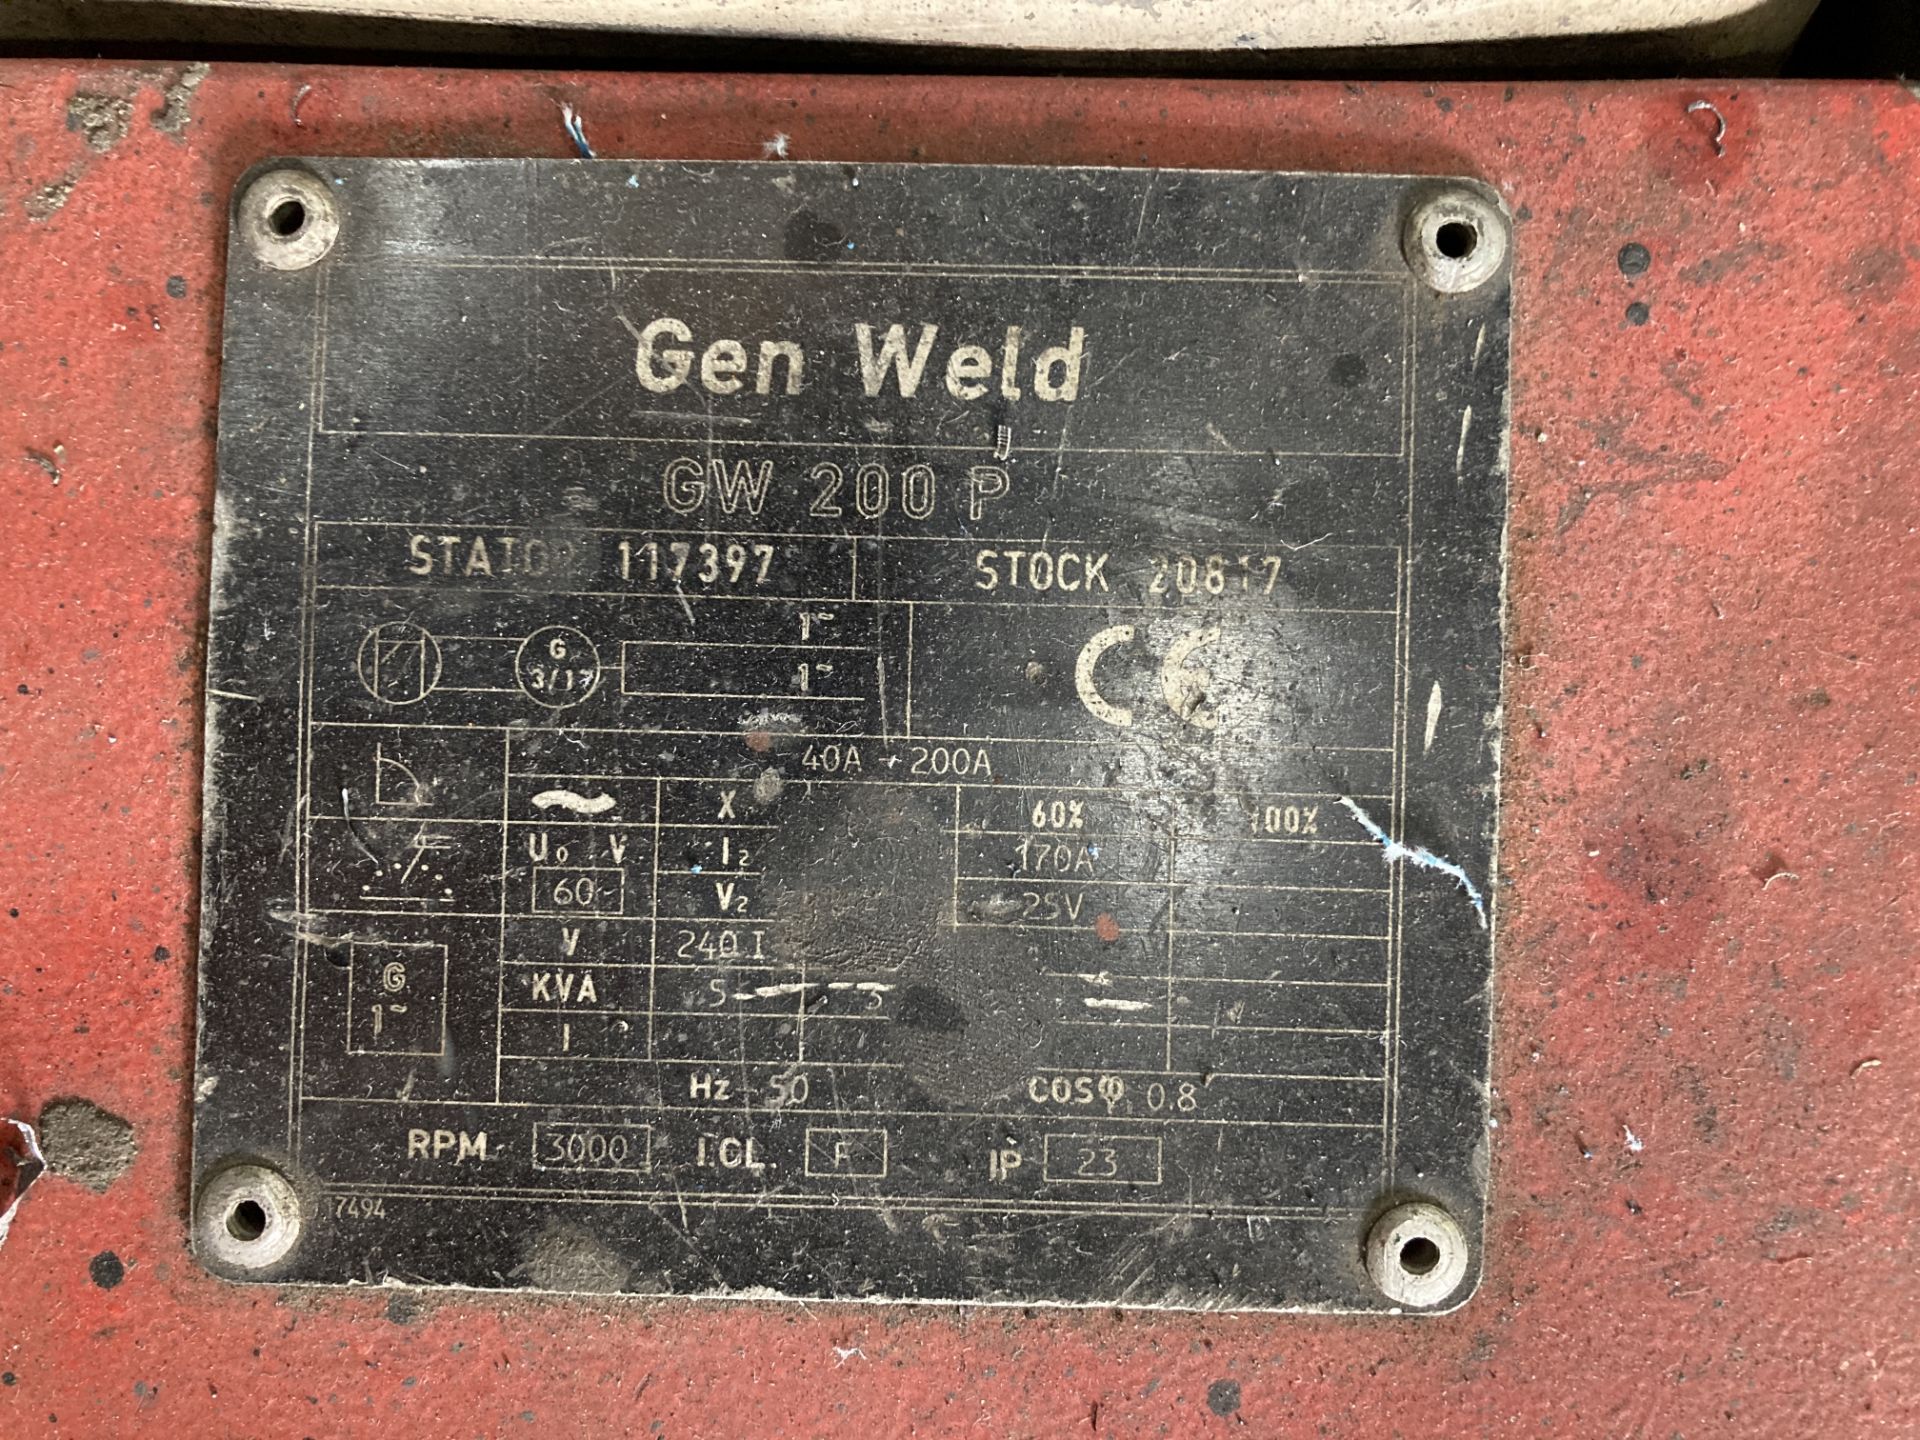 GenWeld GW200P mobile welding set with petrol engine, serial no. 17397 - Image 4 of 4